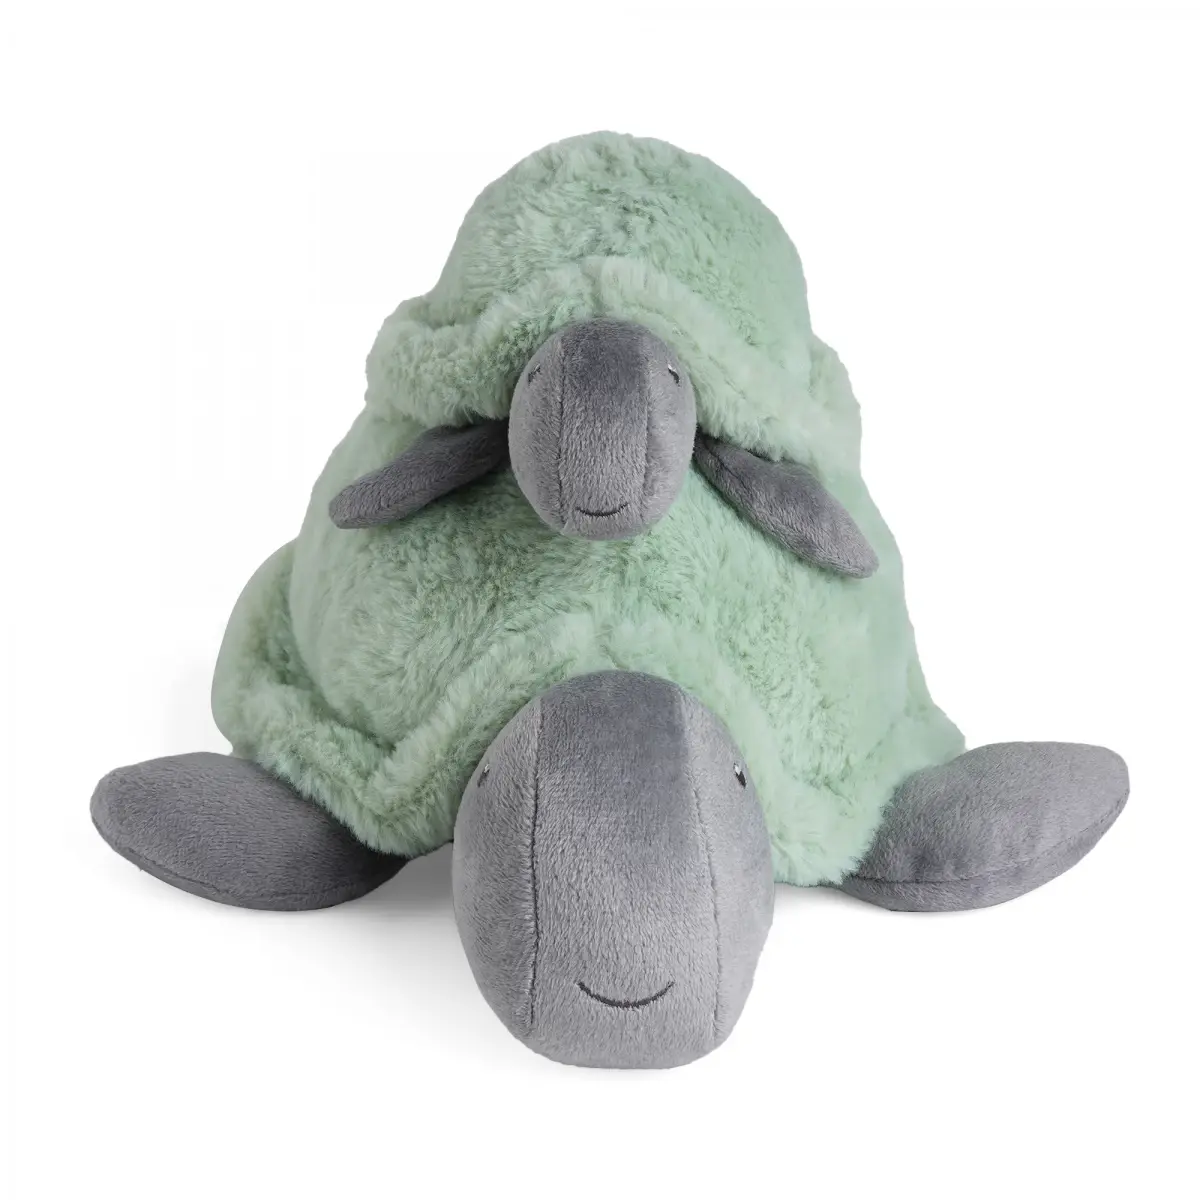 Huggable Cuddly Turtle Stuffed Toy By Fuzzbuzz, Soft Toys for Kids, Cute Plushies Brown, For Kids Of Age 2 Years & Above